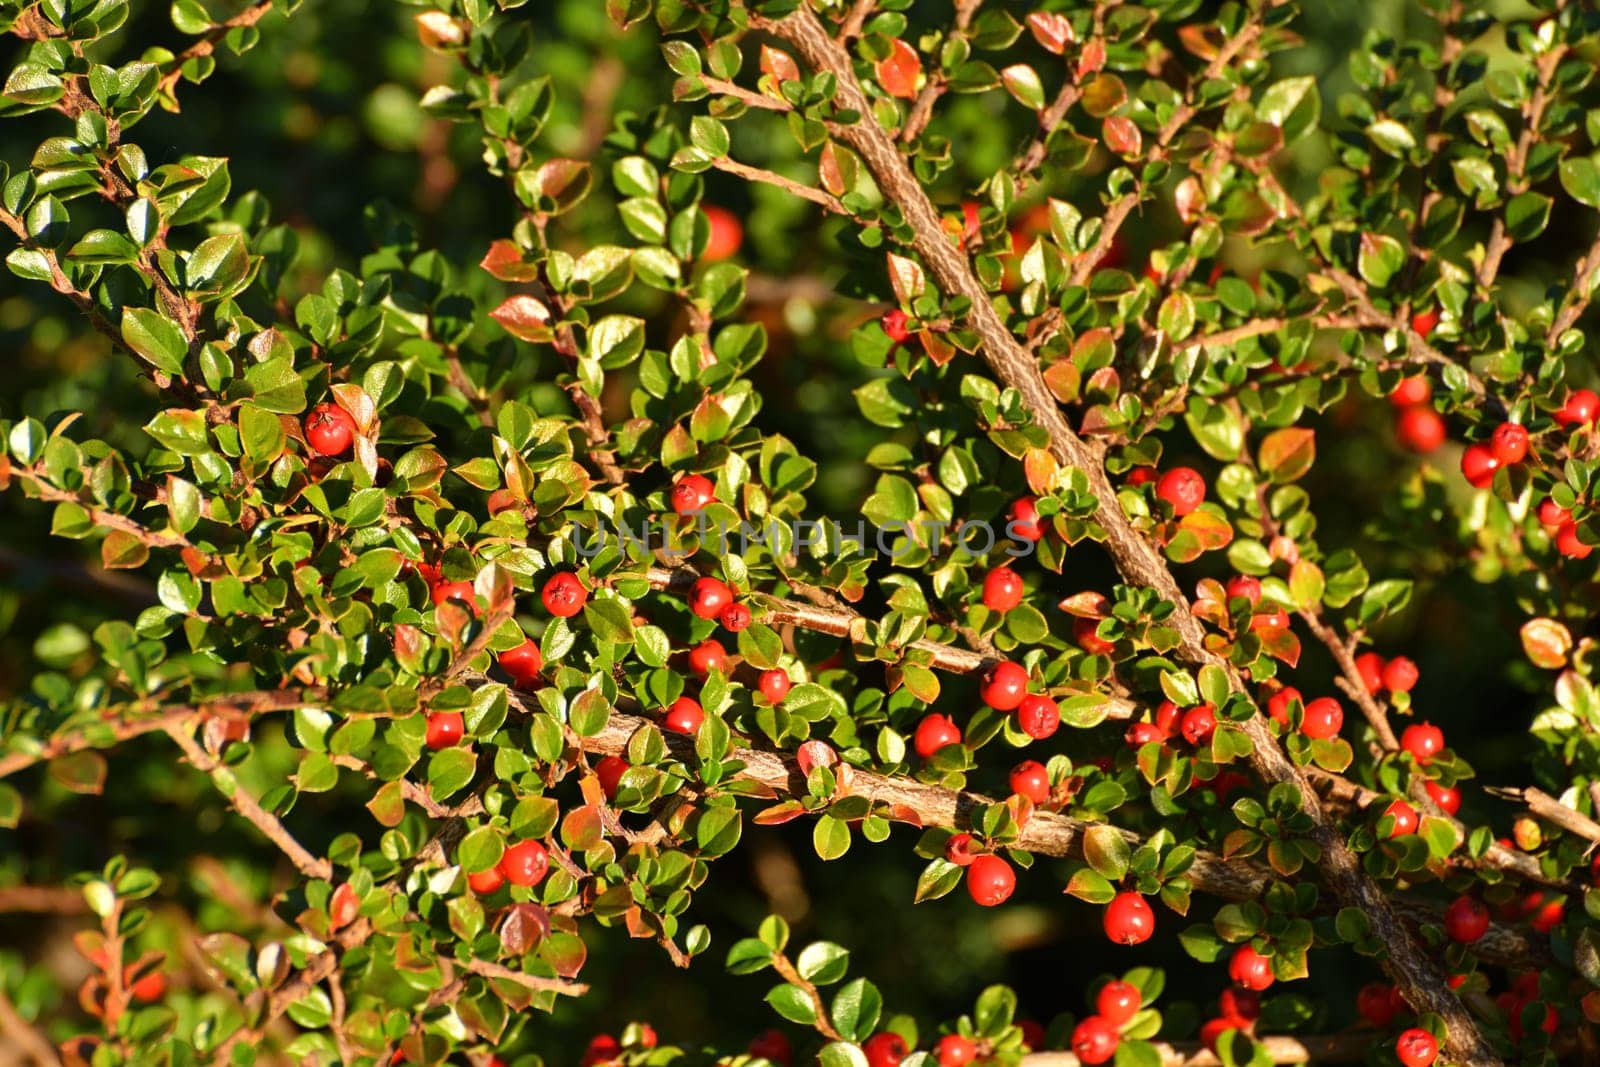 Cotoneaster - ornamental deciduous shrub with a berries, used in landscape design. Autumn